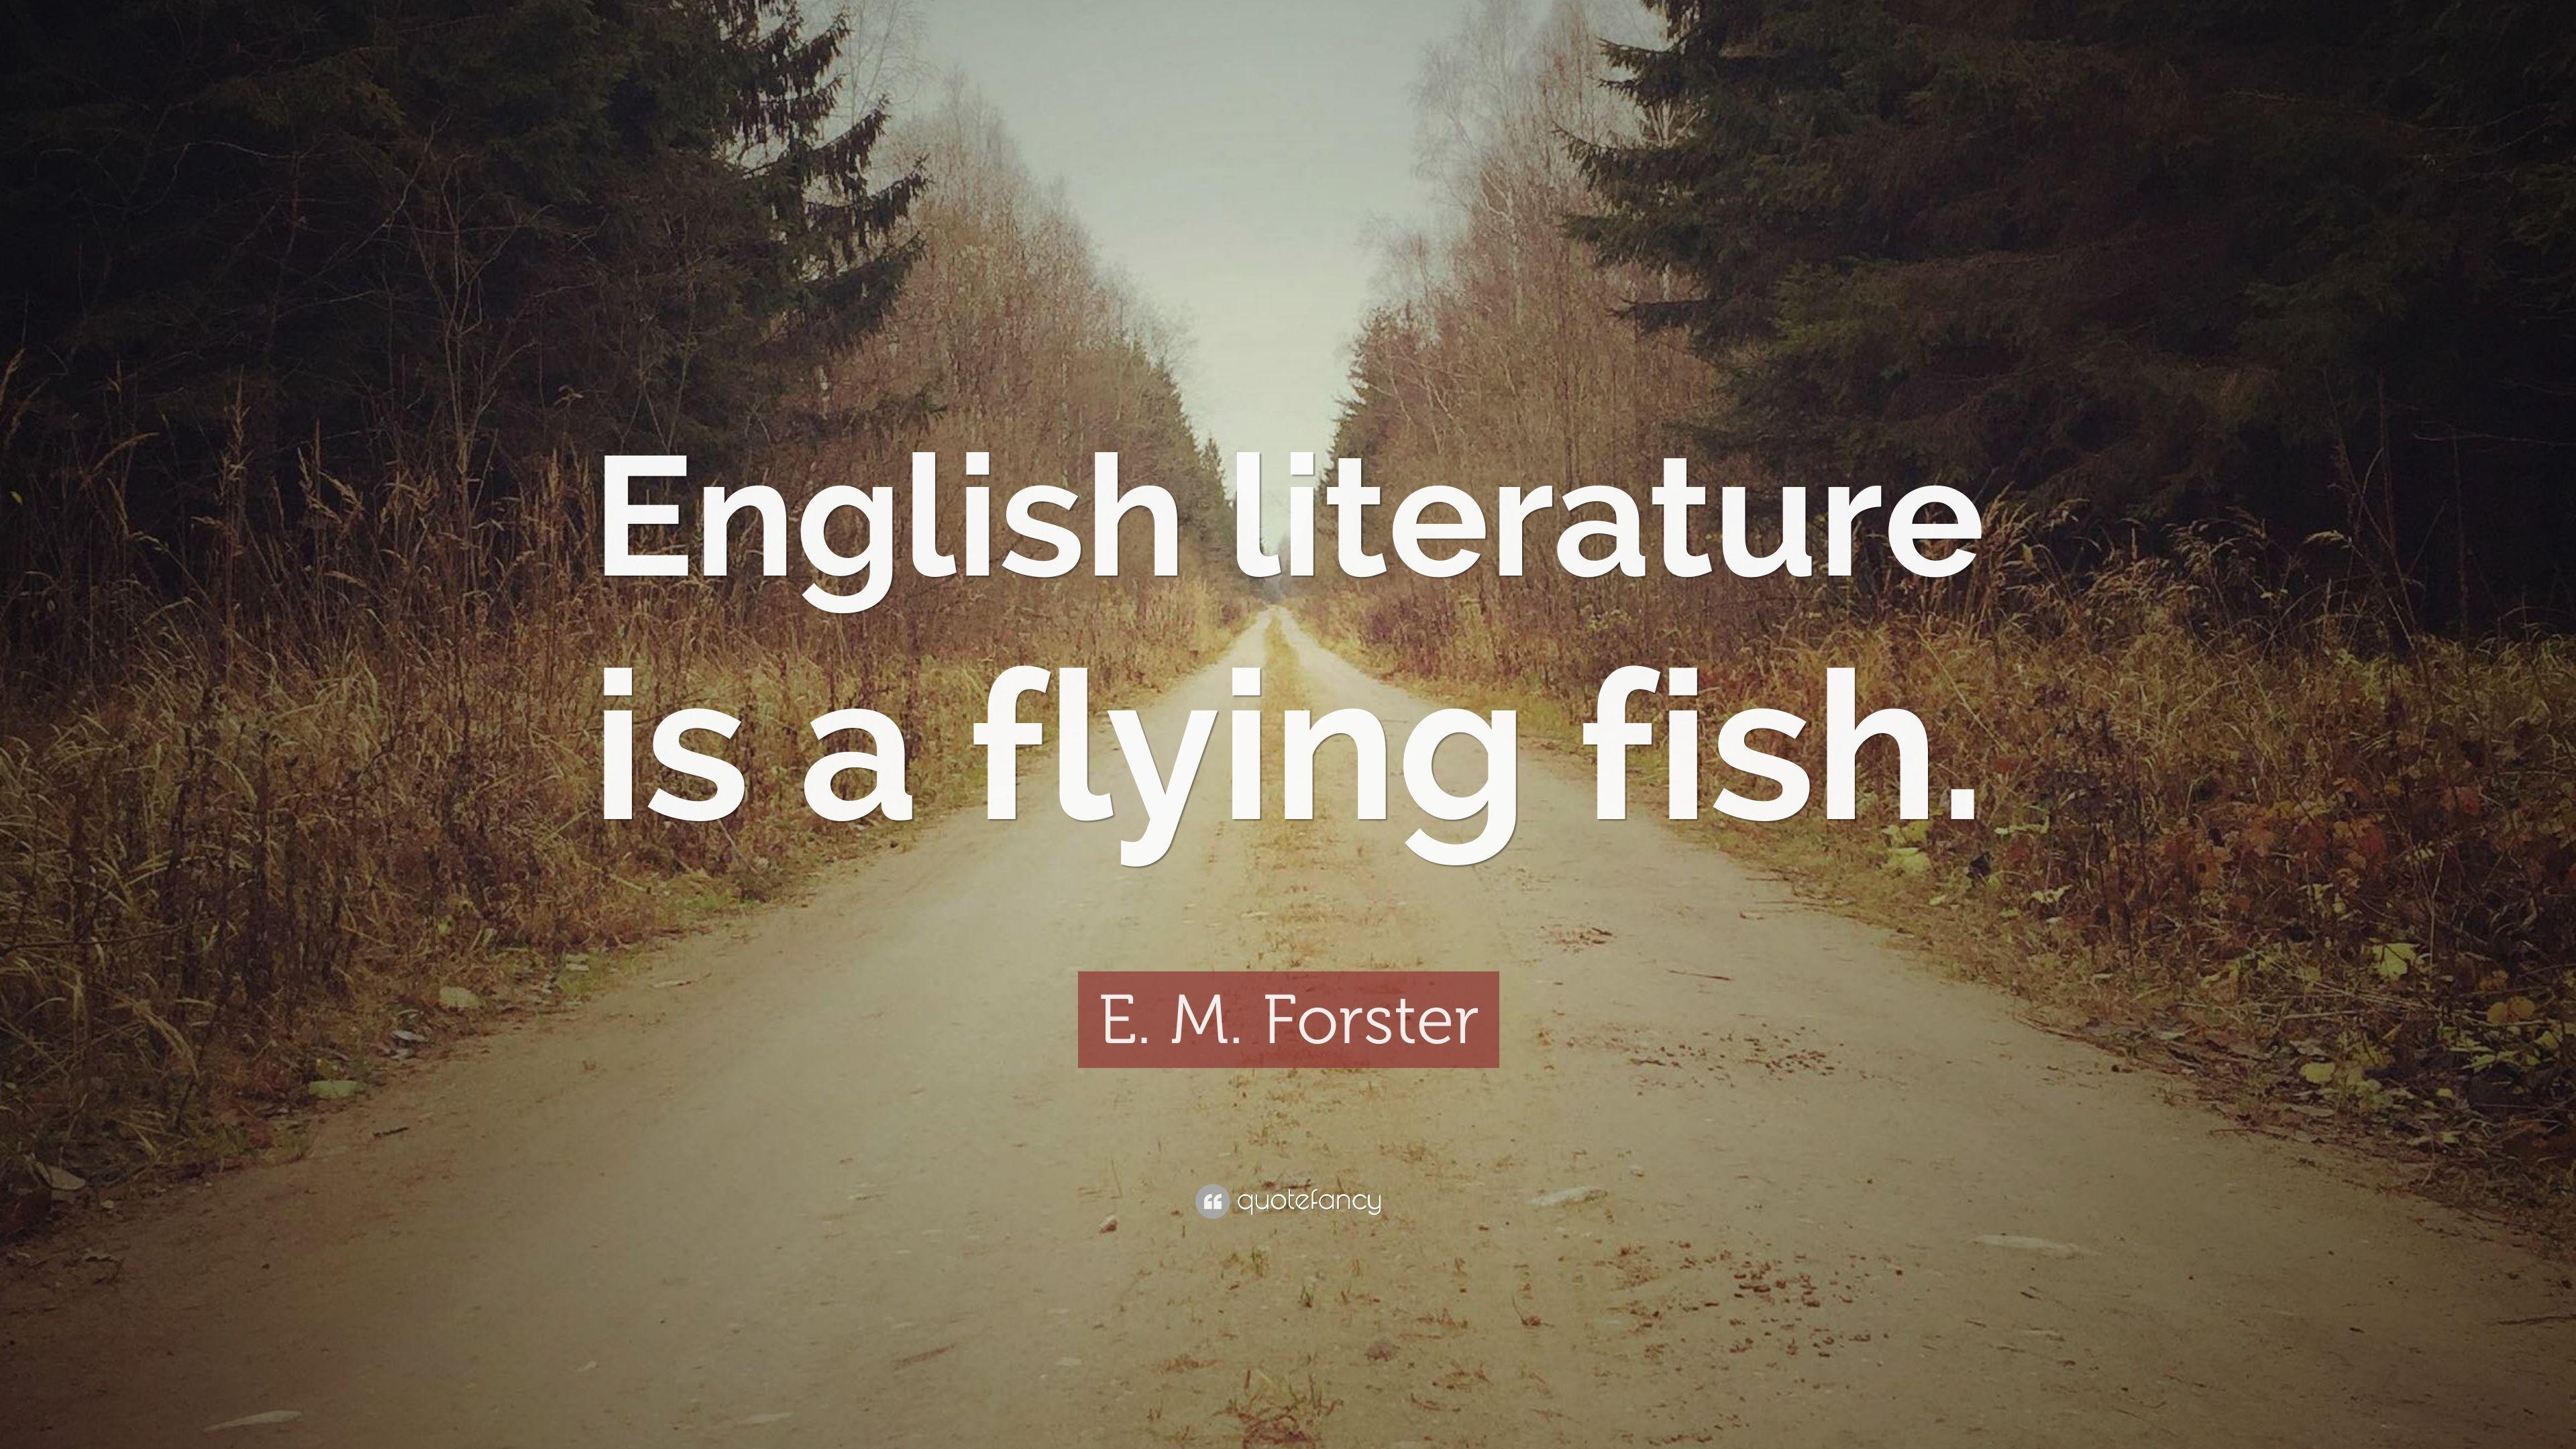 E. M. Forster Quote: “English literature is a flying fish.” 12